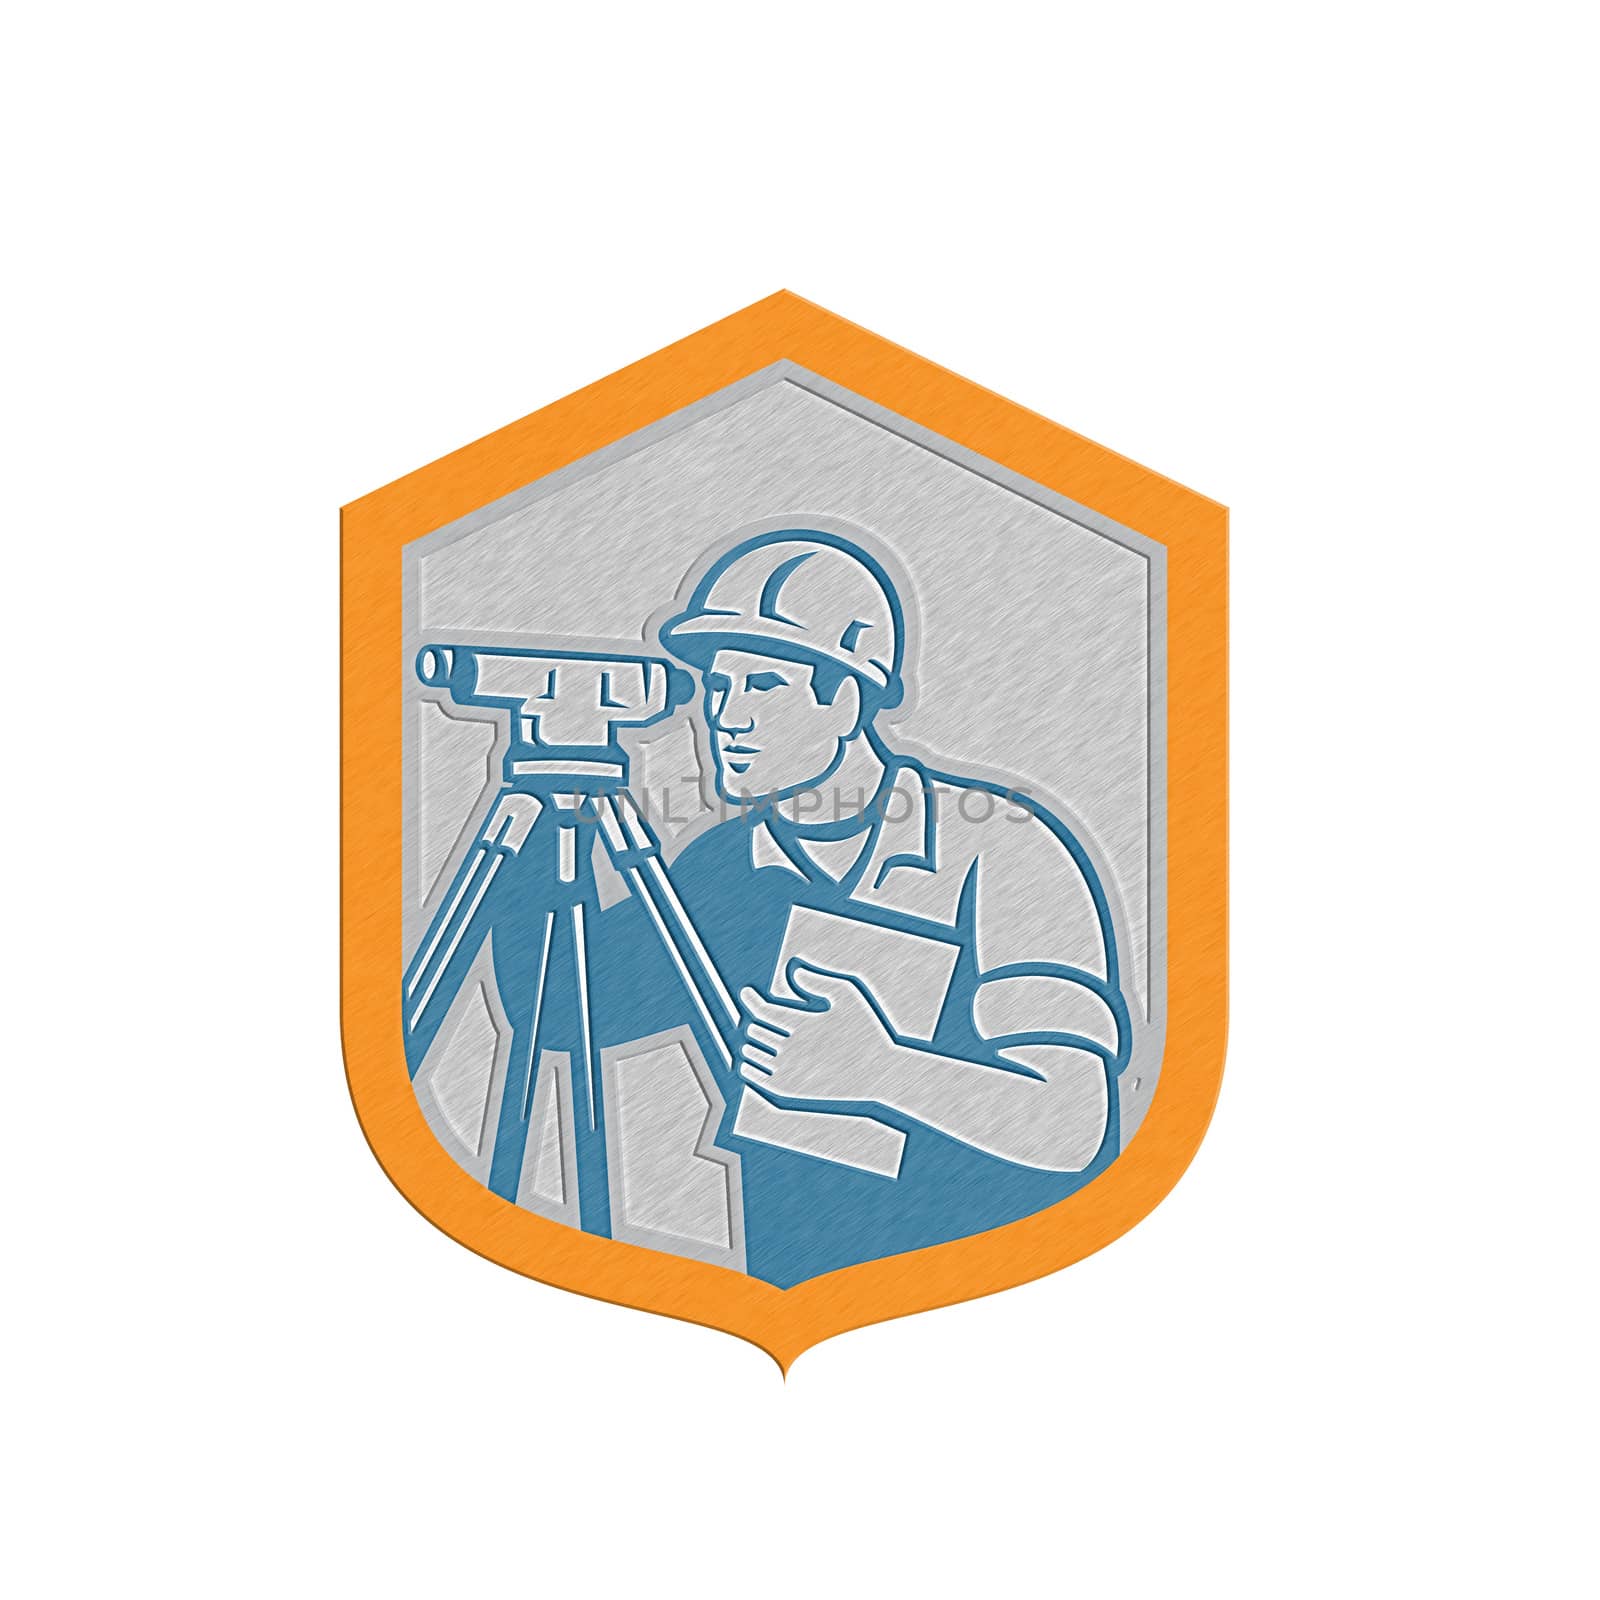 Metallic styled illustration of a surveyor geodetic engineer with theodolite instrument surveying viewed from side set inside shield crest done in retro style on isolated white background.